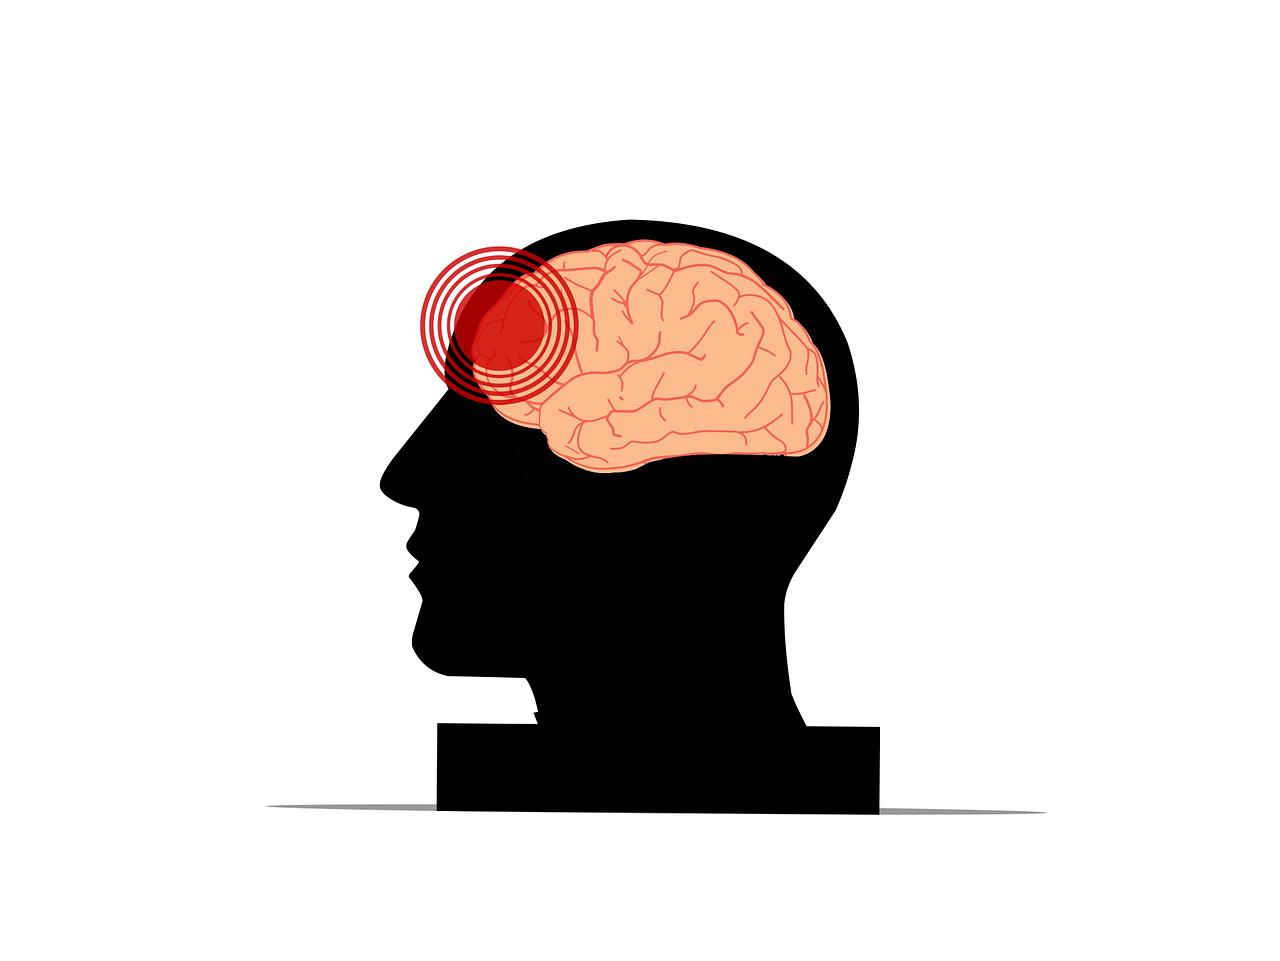 Signs That You May Have Suffered a Brain Injury